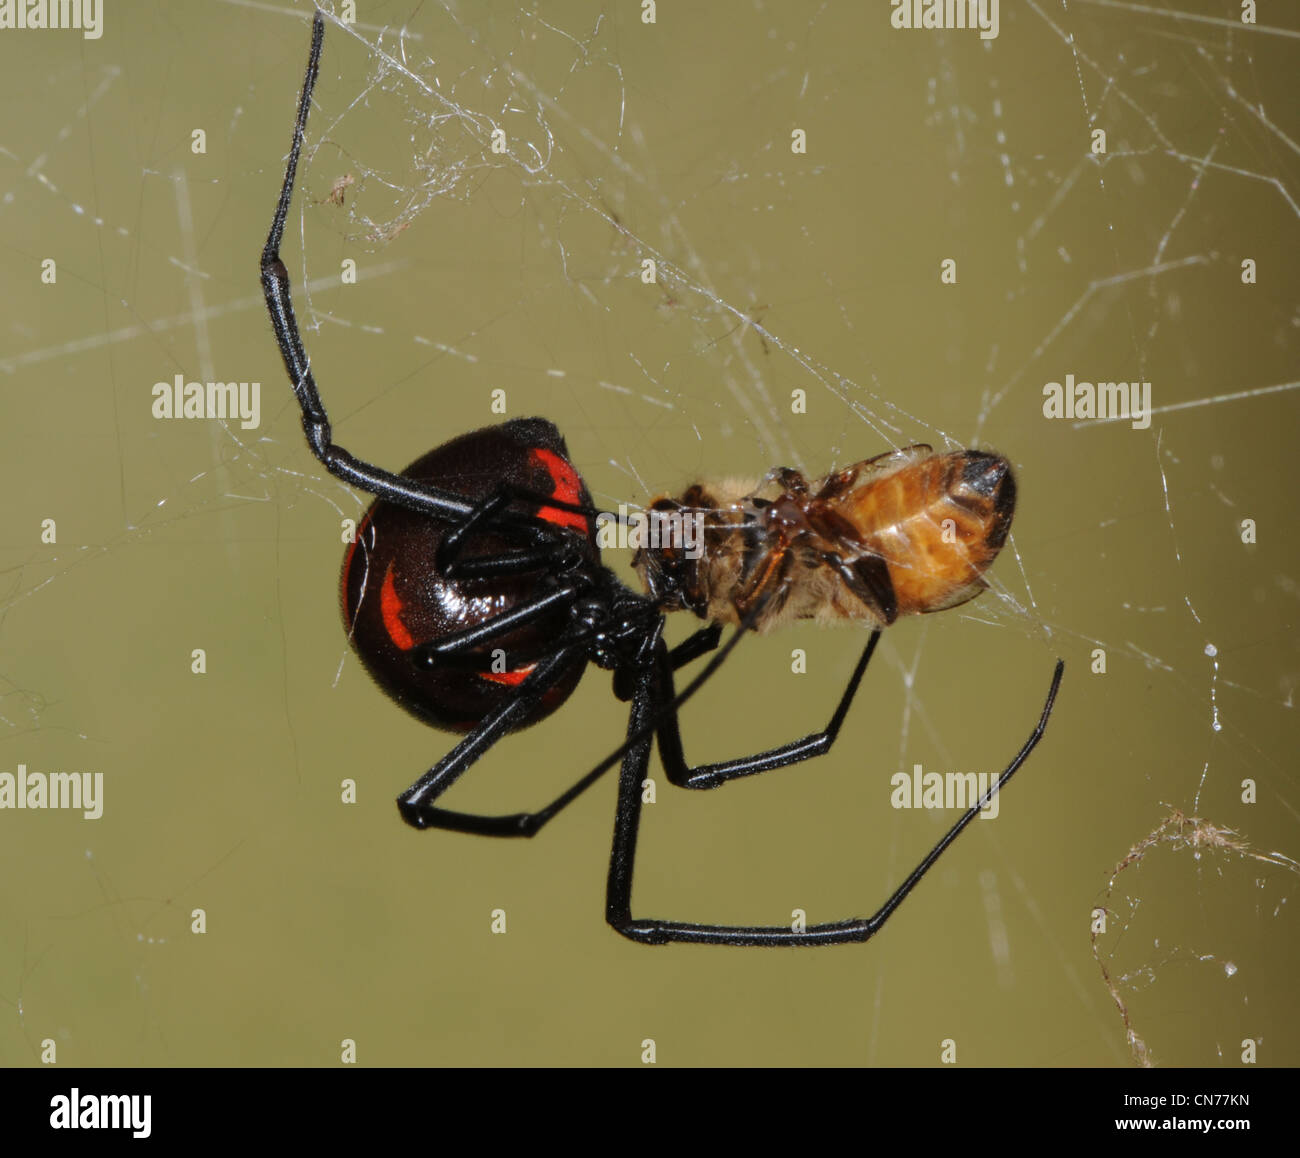 Black widow spider eating a honey bee Stock Photo